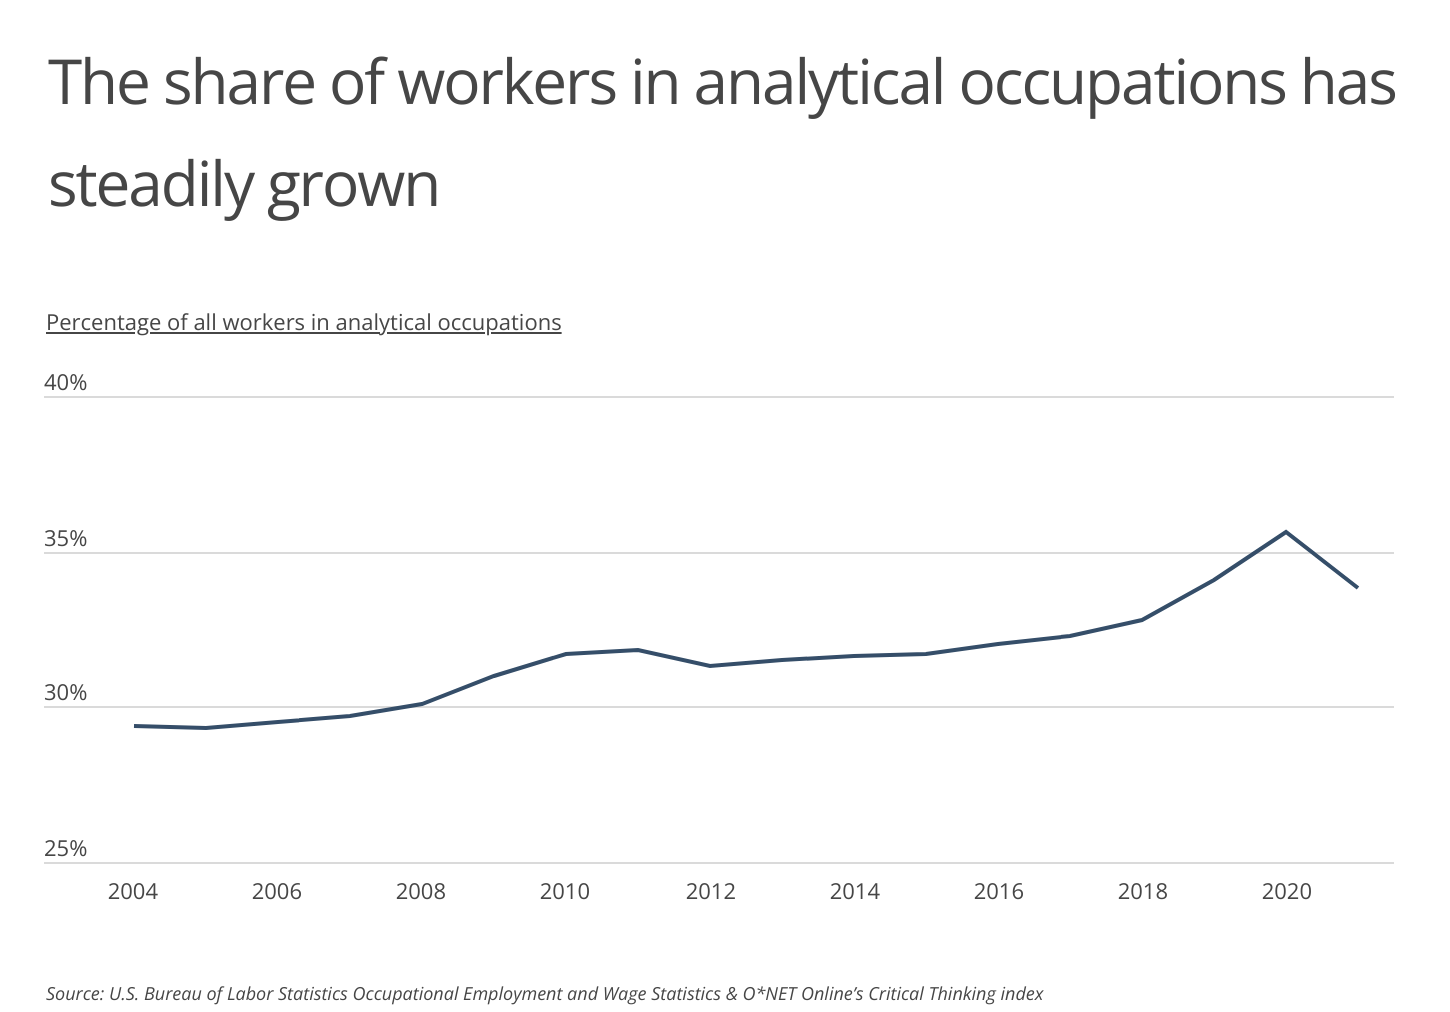 Chart1_The share of workers in analytical occupations has steadily grown